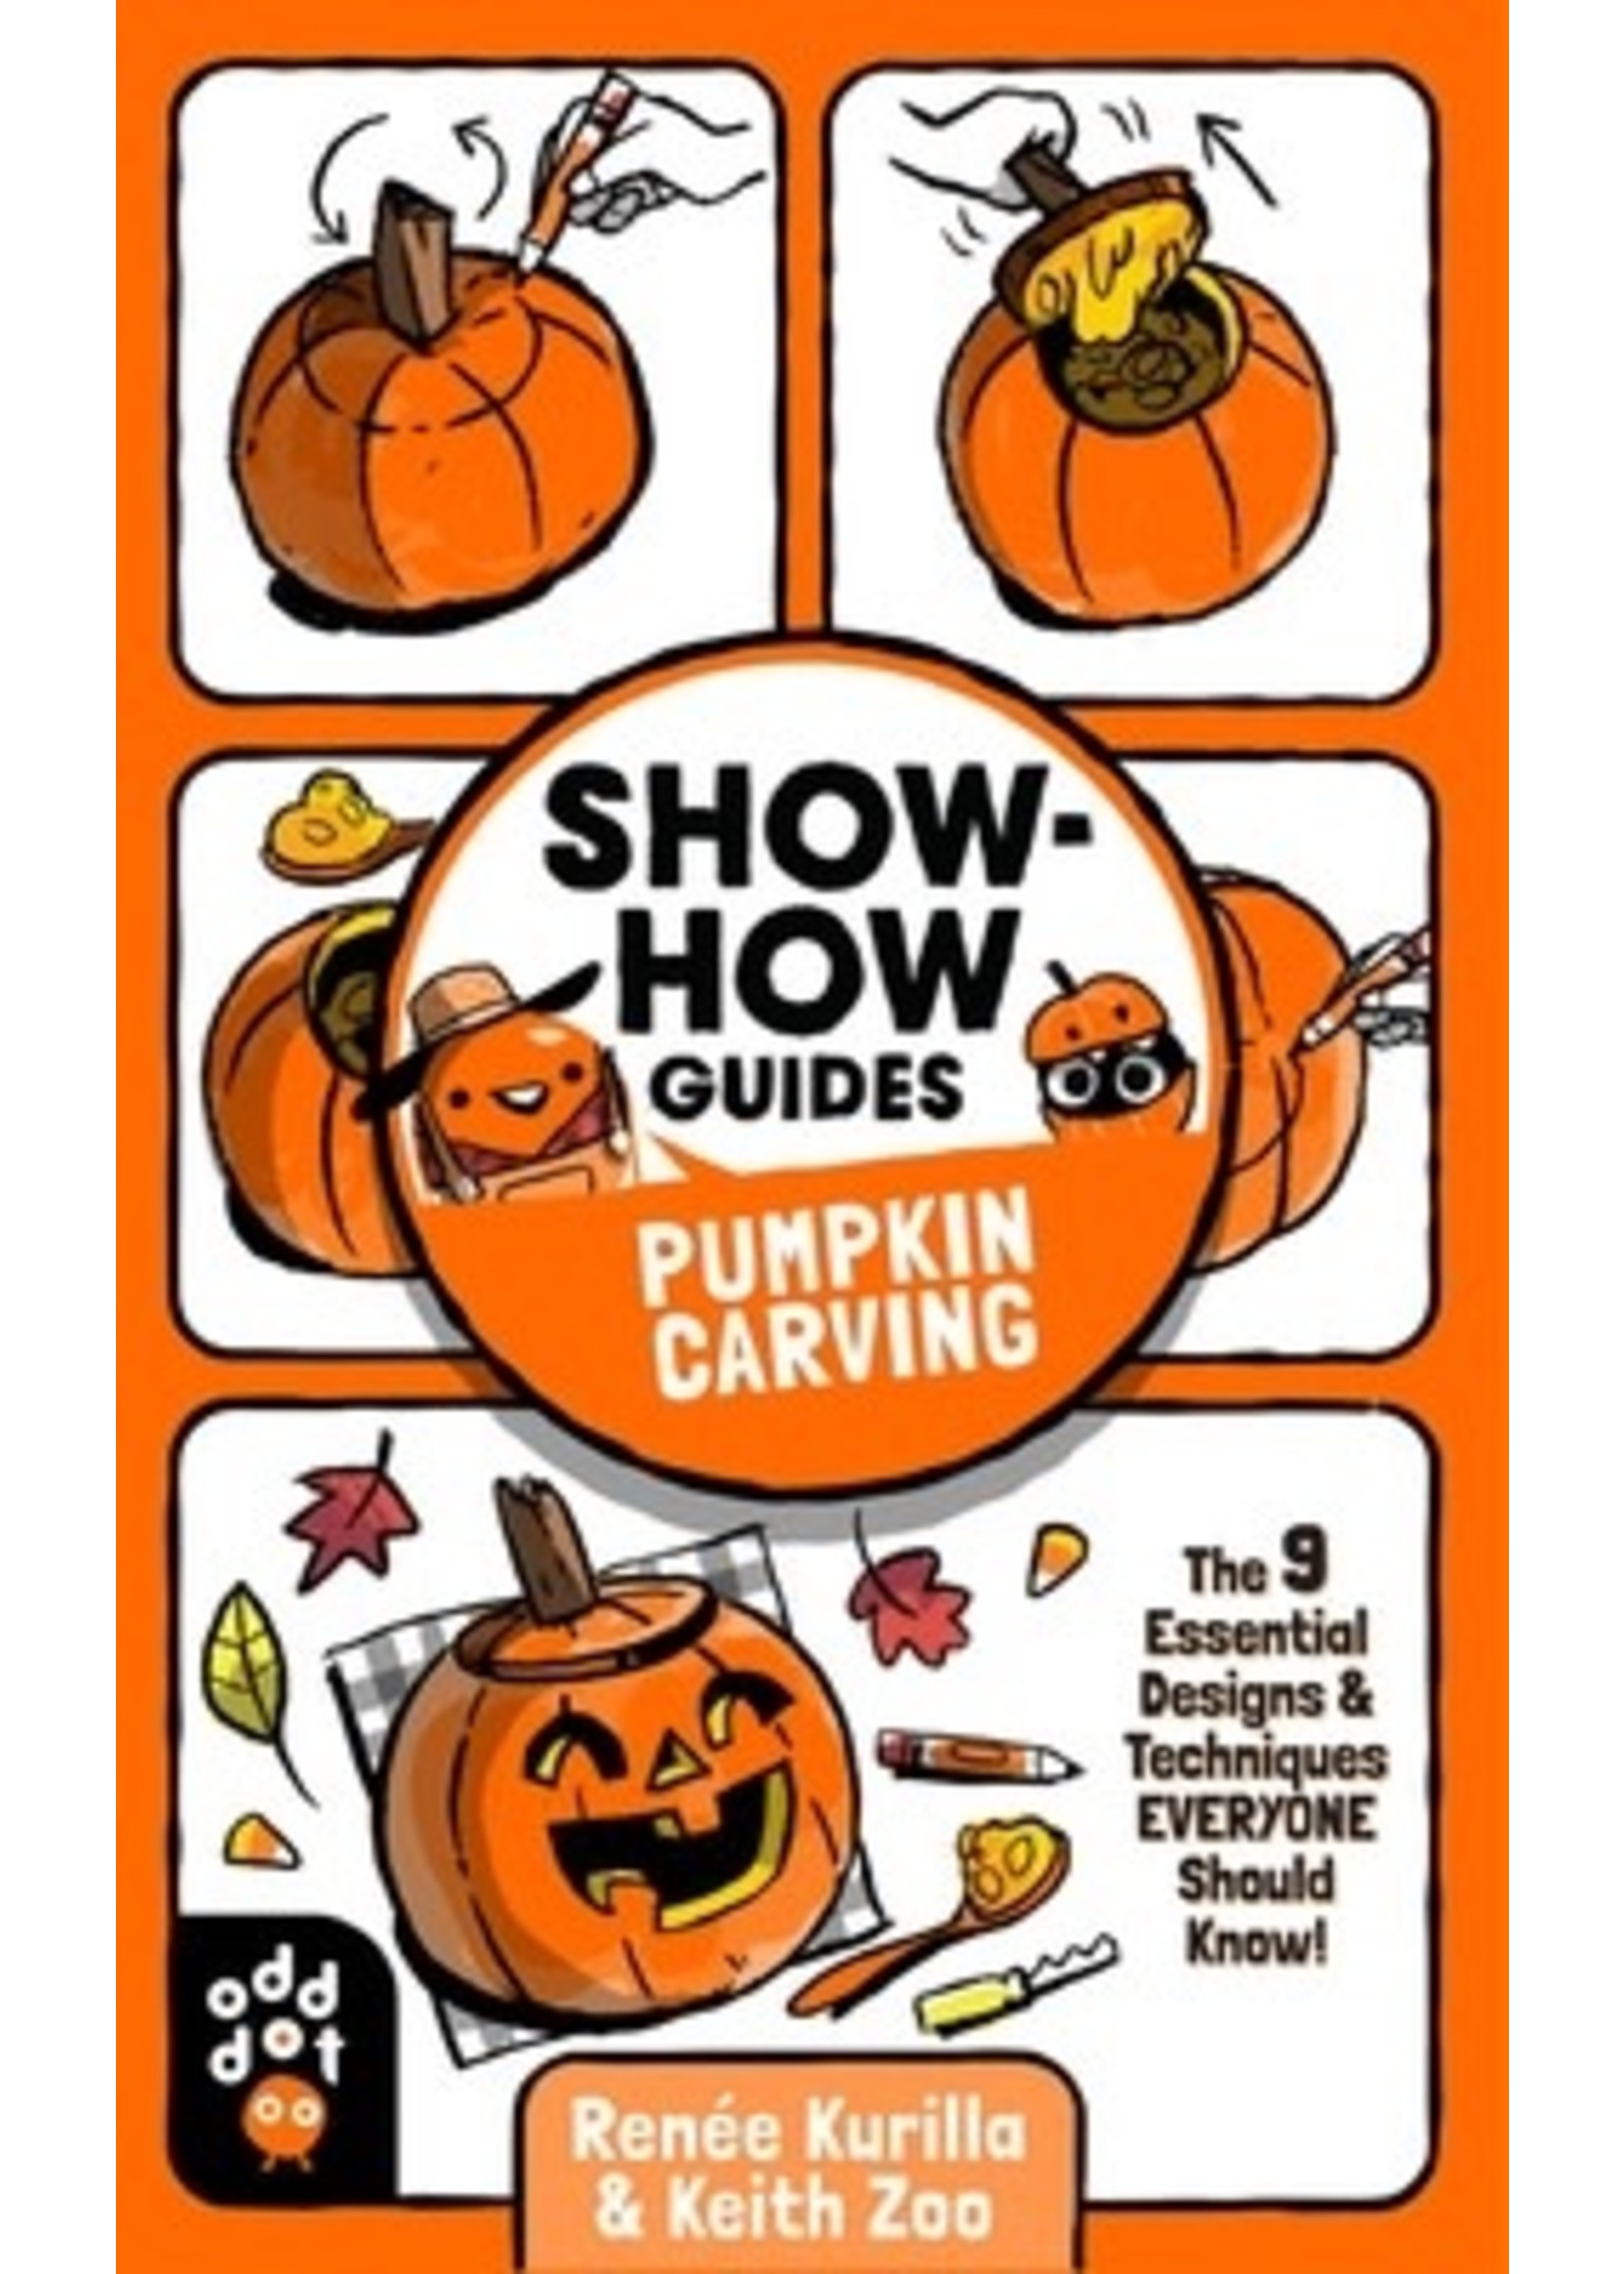 Show-How Guides: Pumpkin Carving: The 9 Essential Designs Techniques Everyone Should Know! by Renee Kurilla, Keith Zoo